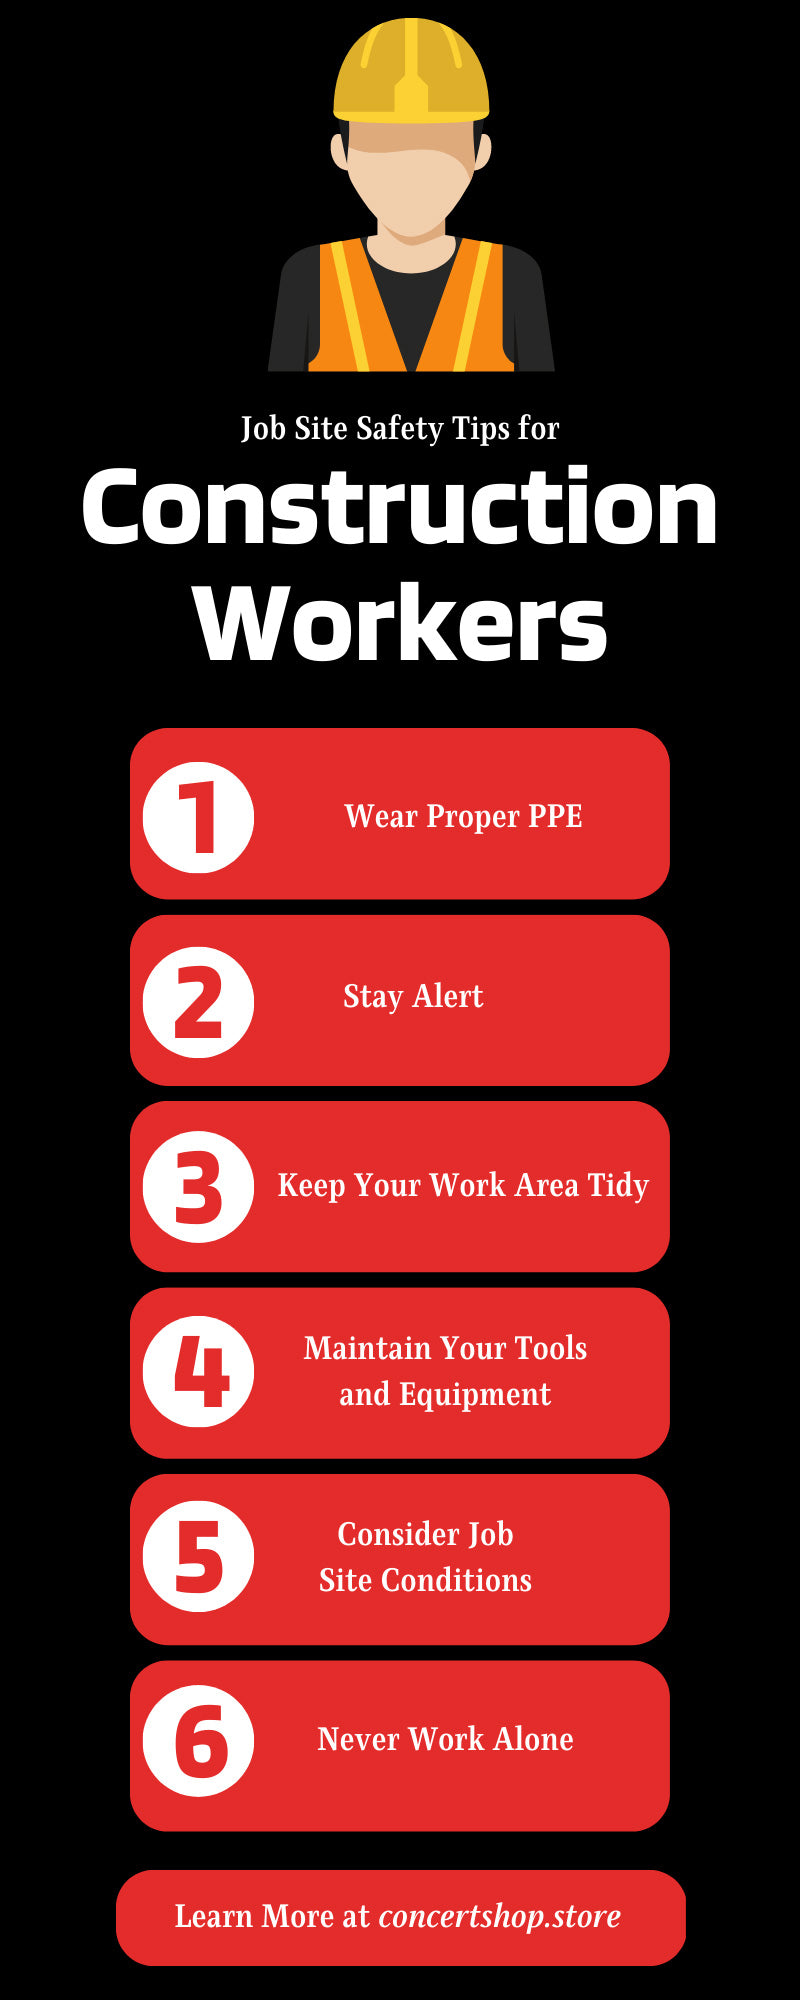 10 Job Site Safety Tips for Construction Workers